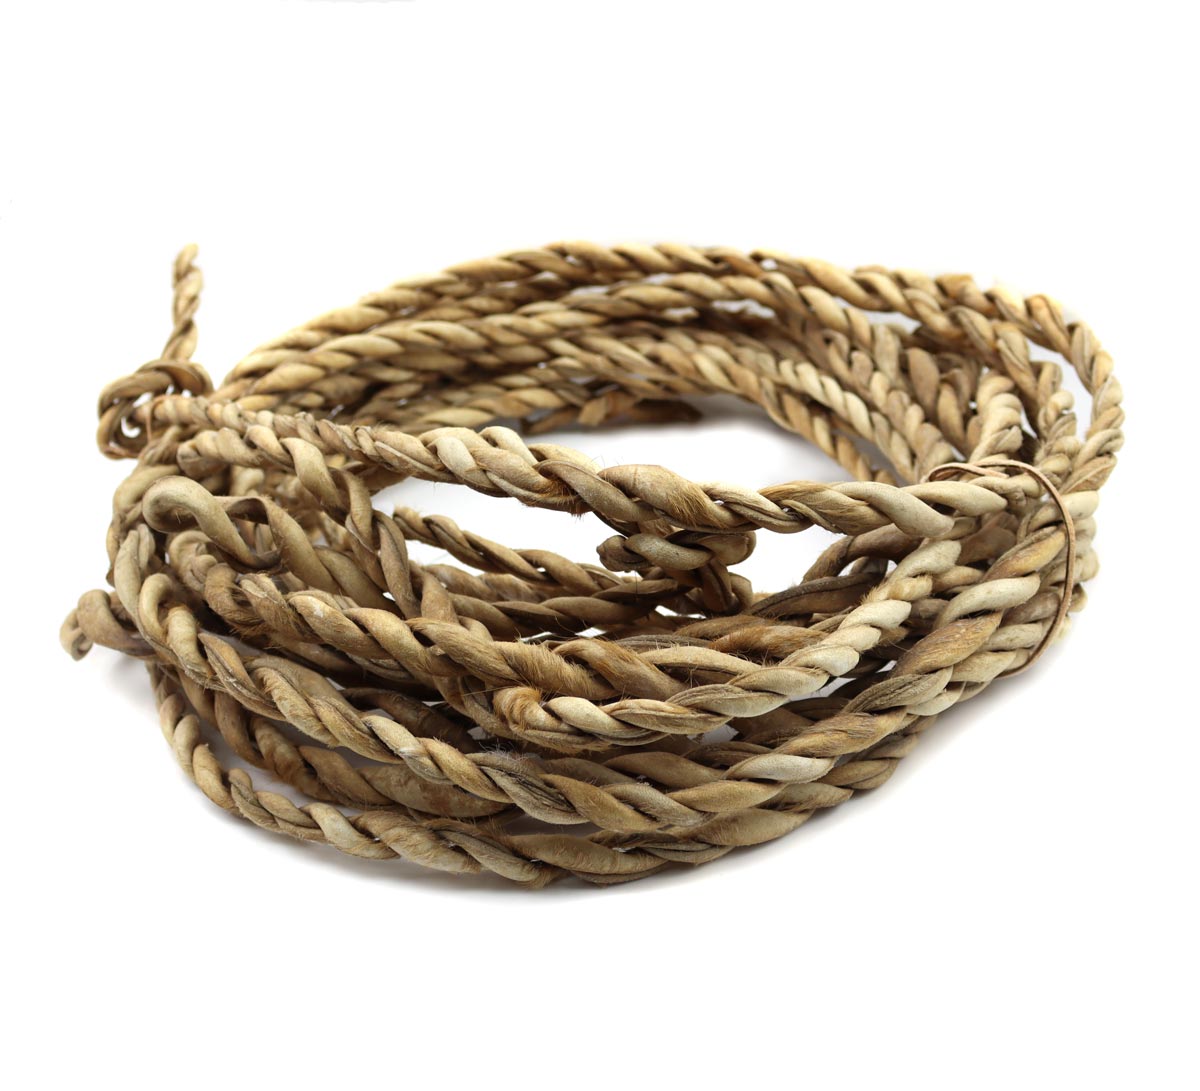 Rawhide Rope c. 1930s, 18" x 16" (M92323A-0422-002) 5